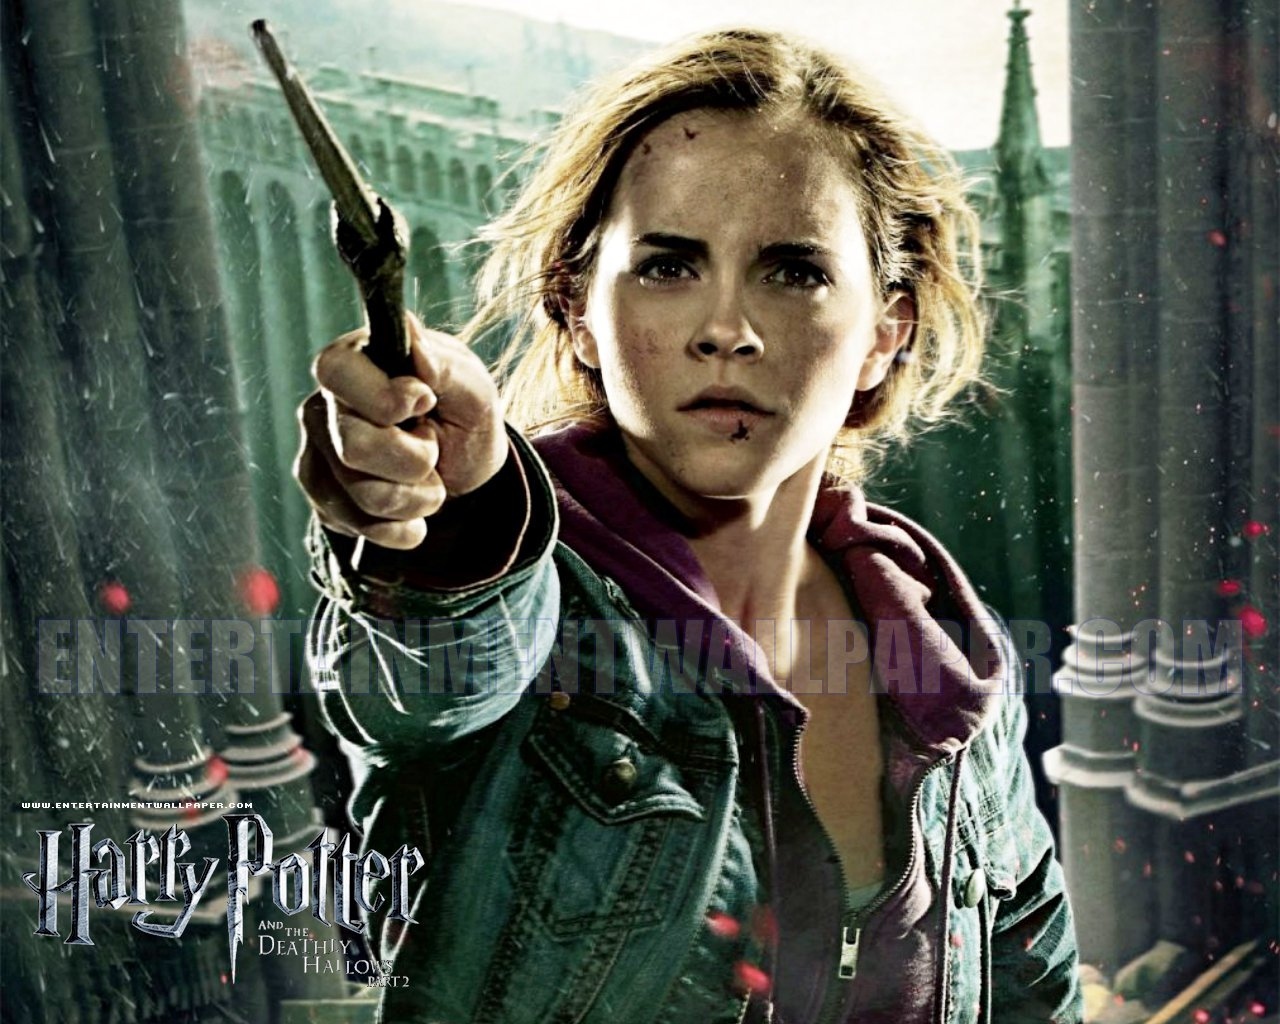 Harry Potter and the Deathly Hallows: Part II (2011) - Upcoming Movies